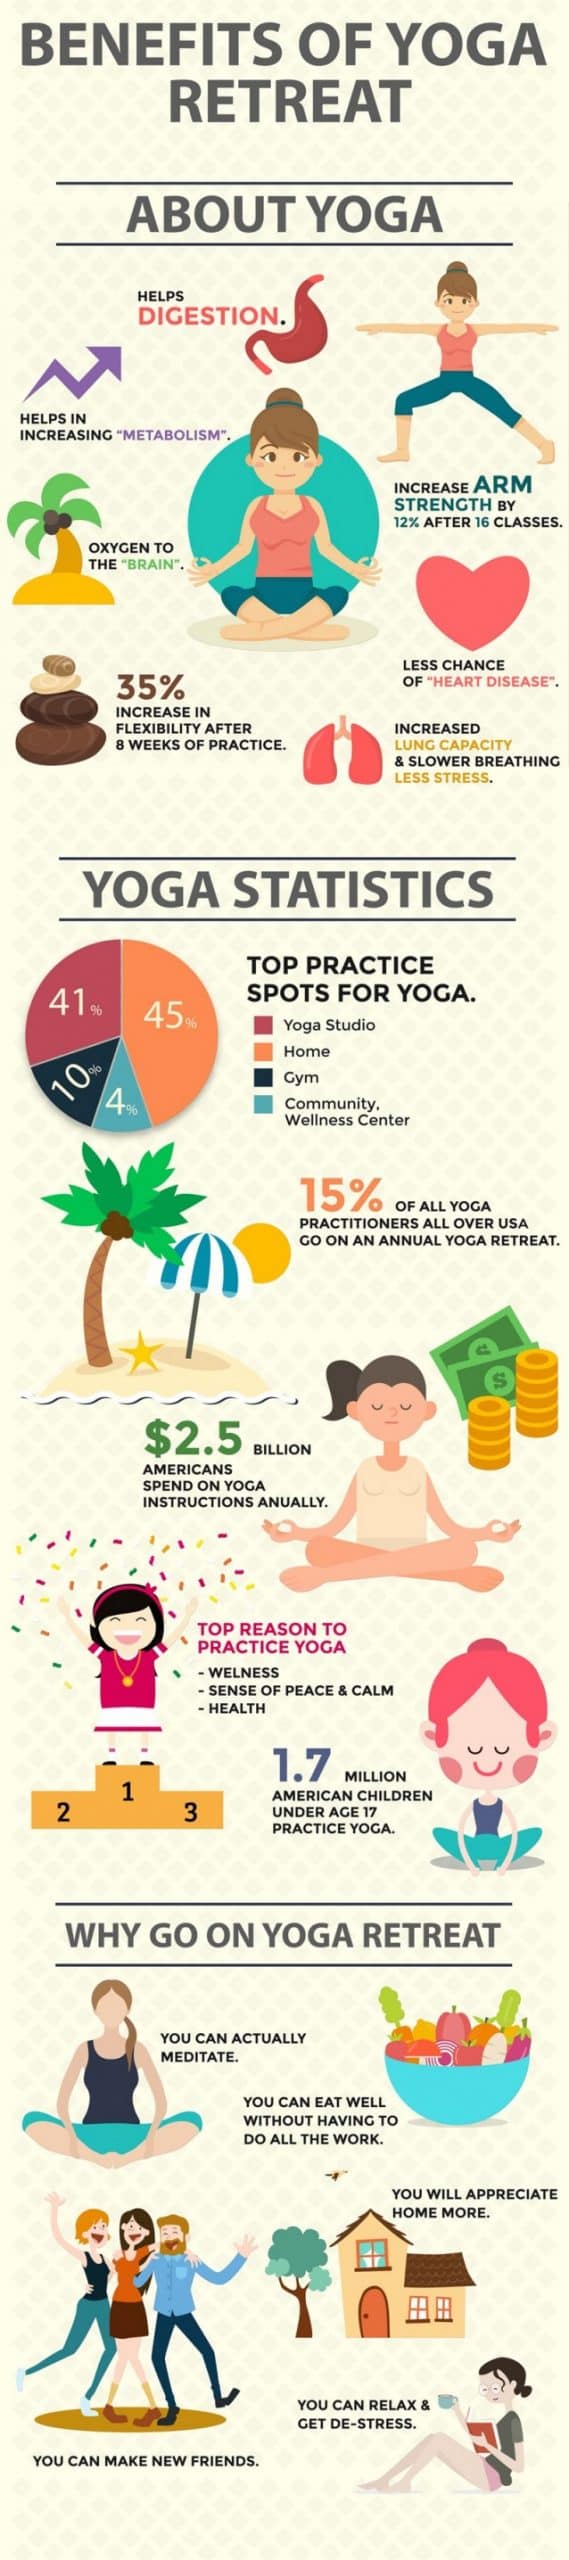 Why You Should Go On That Yoga Retreat | Daily Infographic